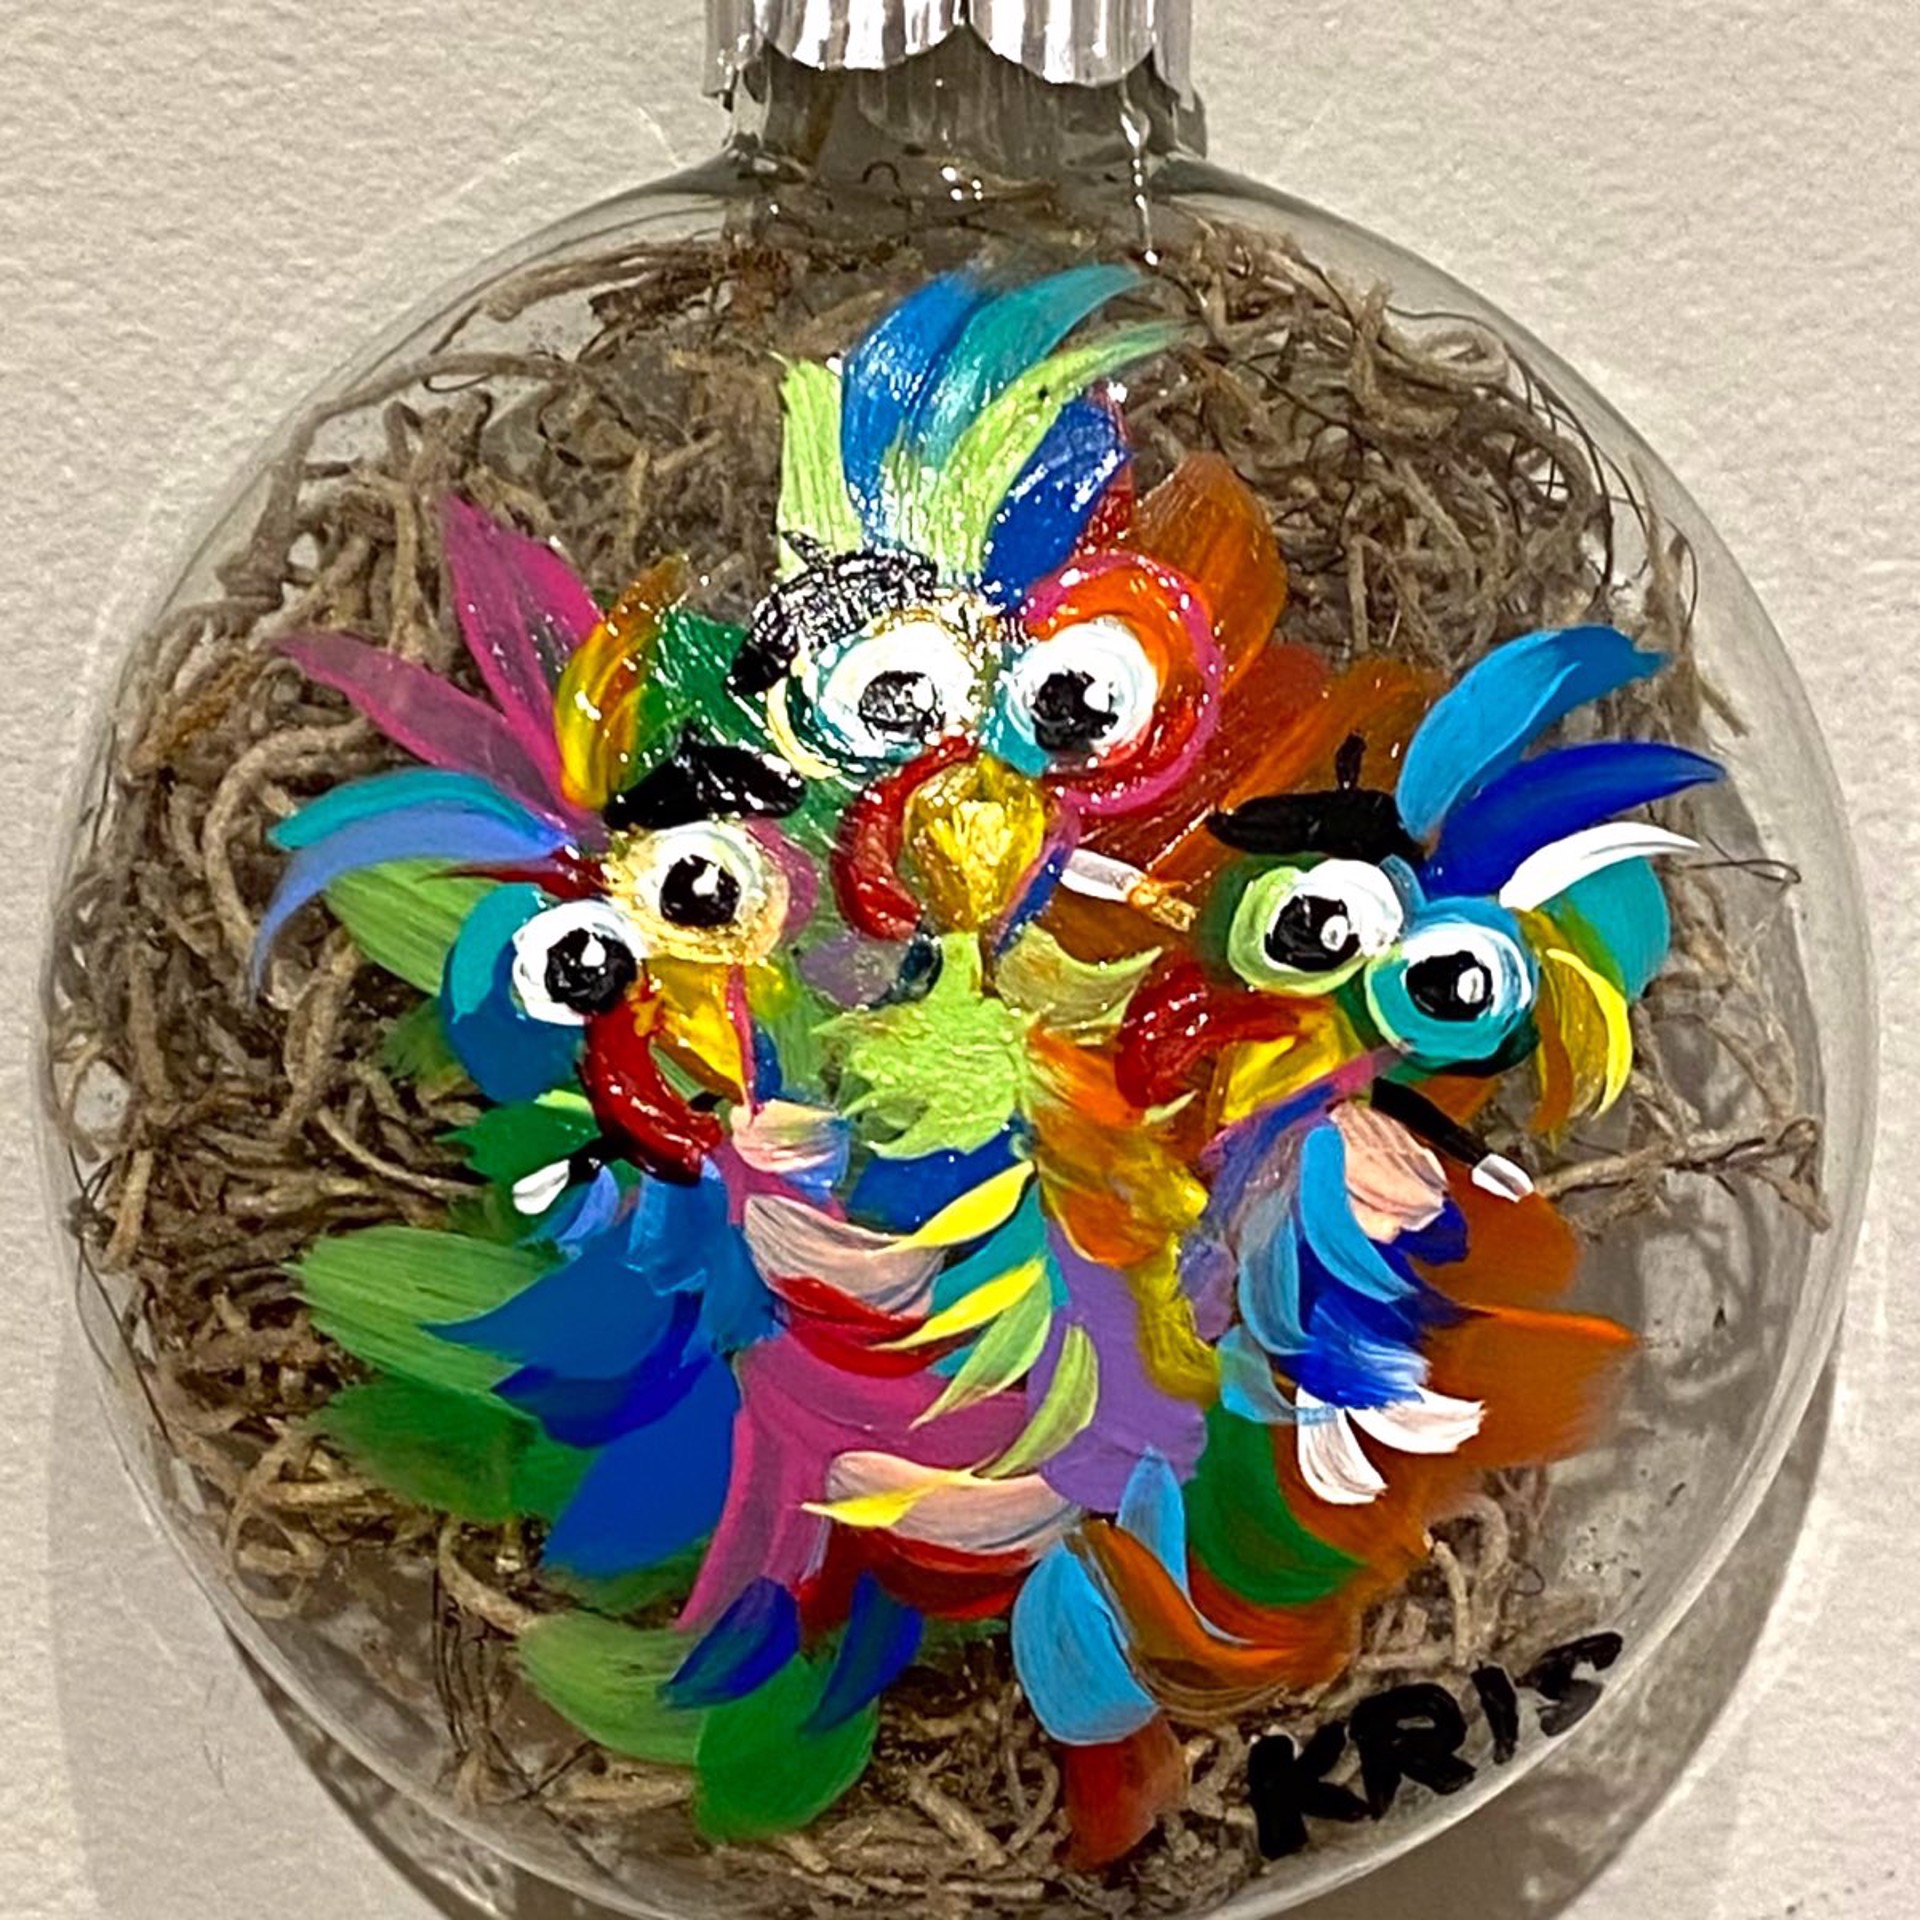 Three French Hens Ornament by Kris Manning